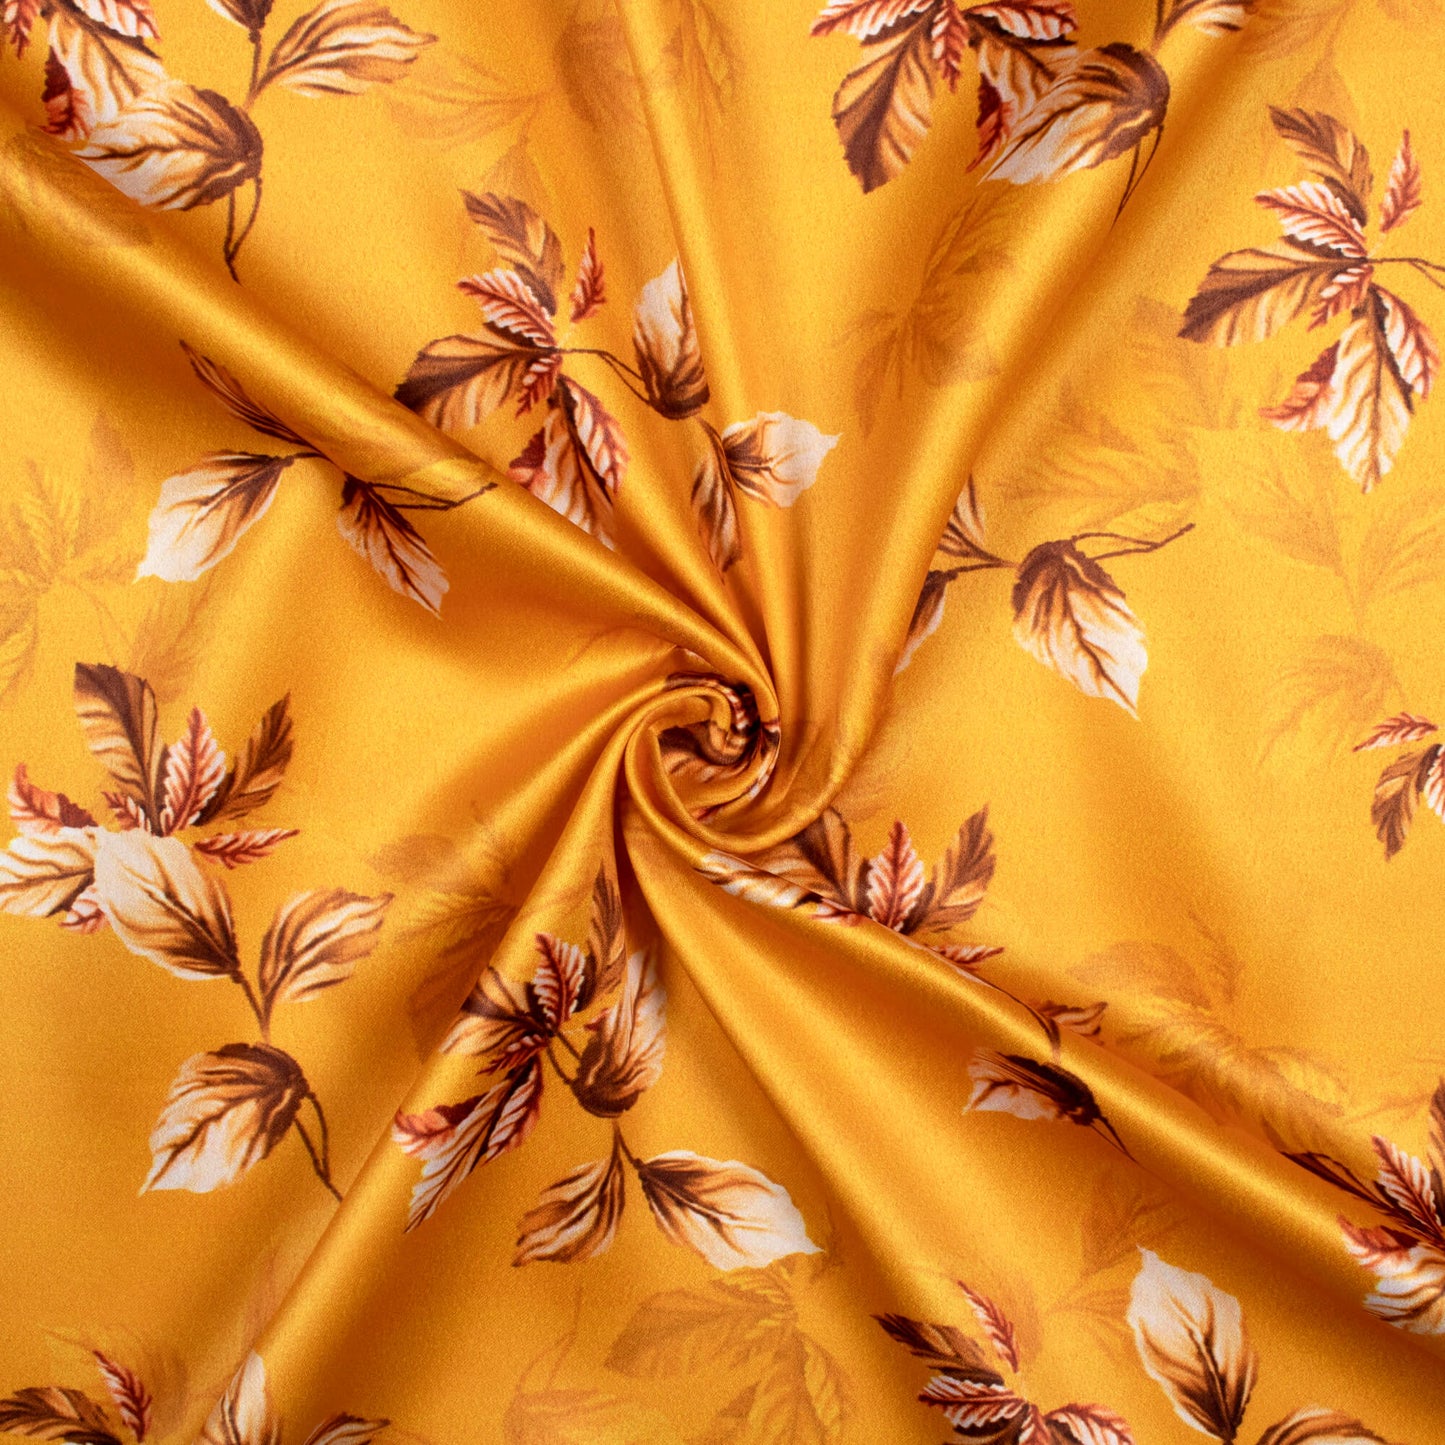 Fire Yellow And Brown Leaf Pattern Digital Print Charmeuse Satin Fabric (Width 58 Inches)